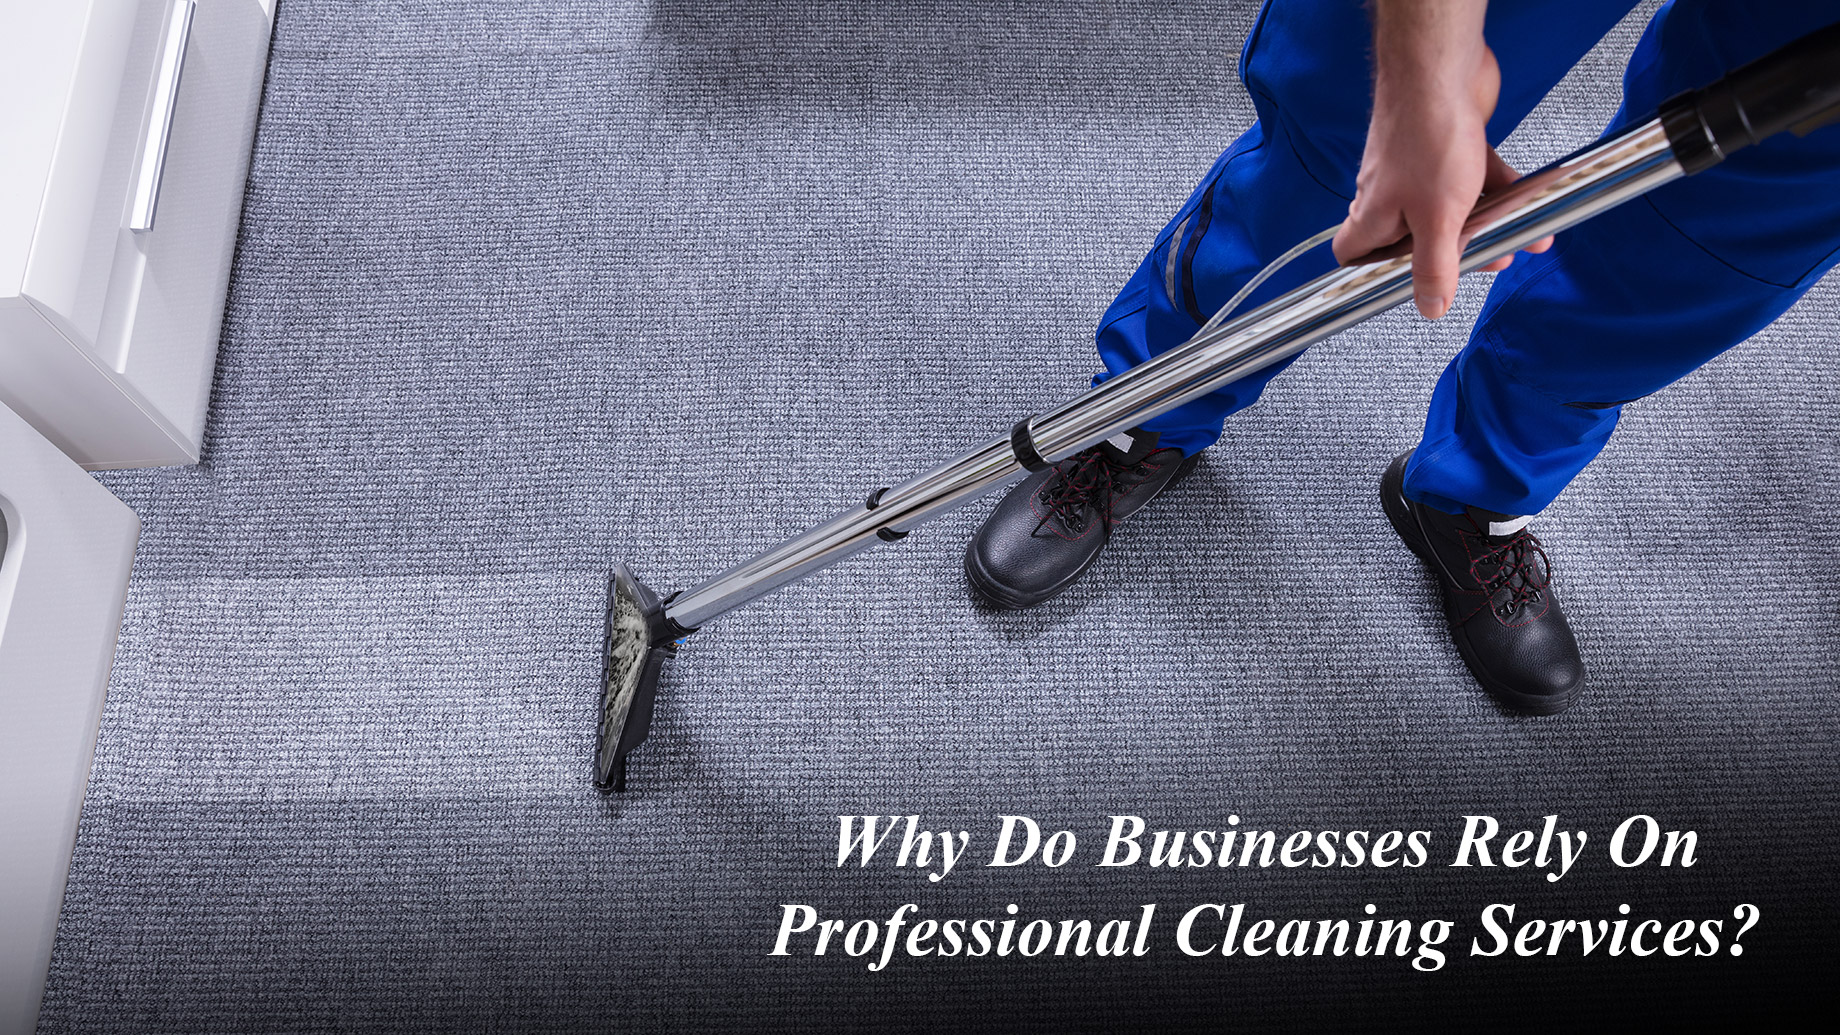 Why Do Businesses Rely On Professional Cleaning Services?